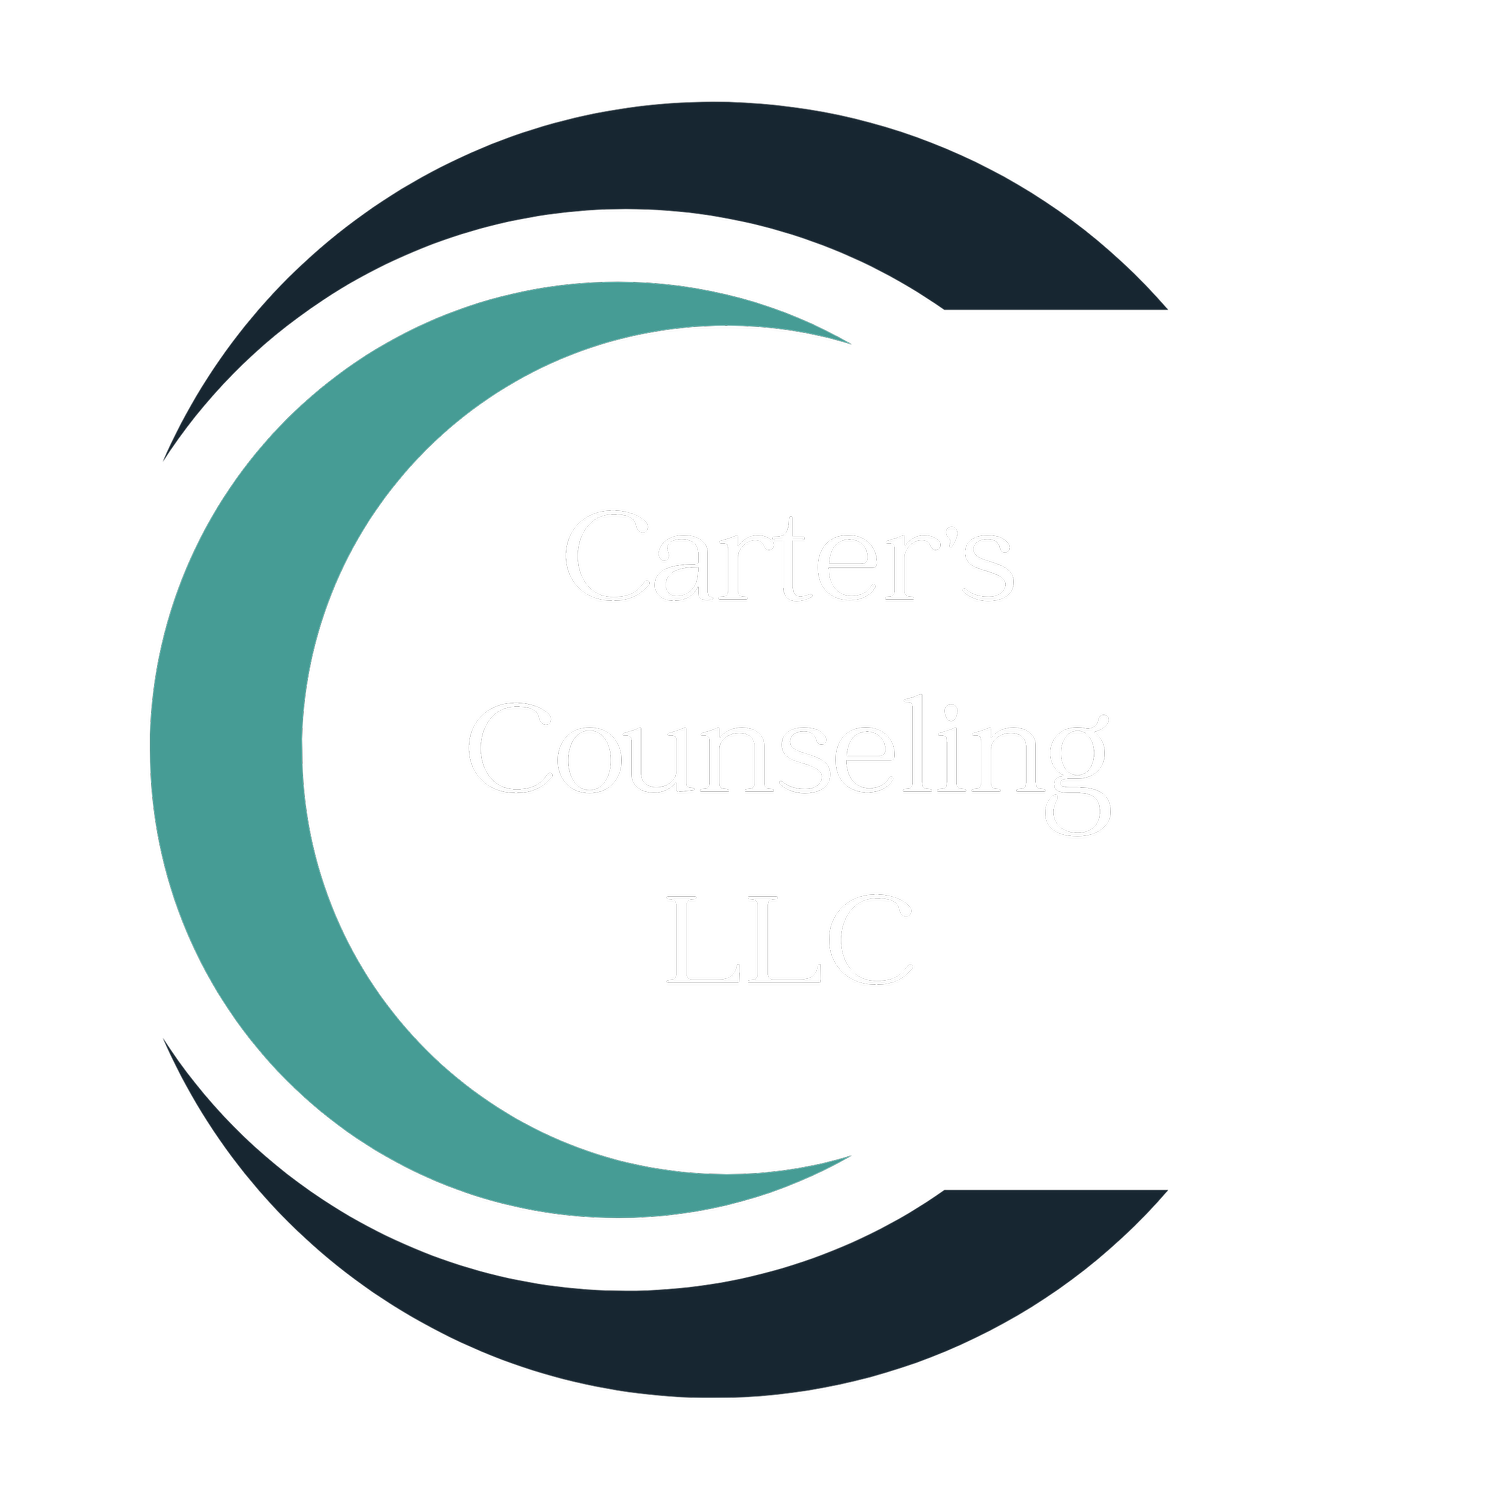 Carters Counseling